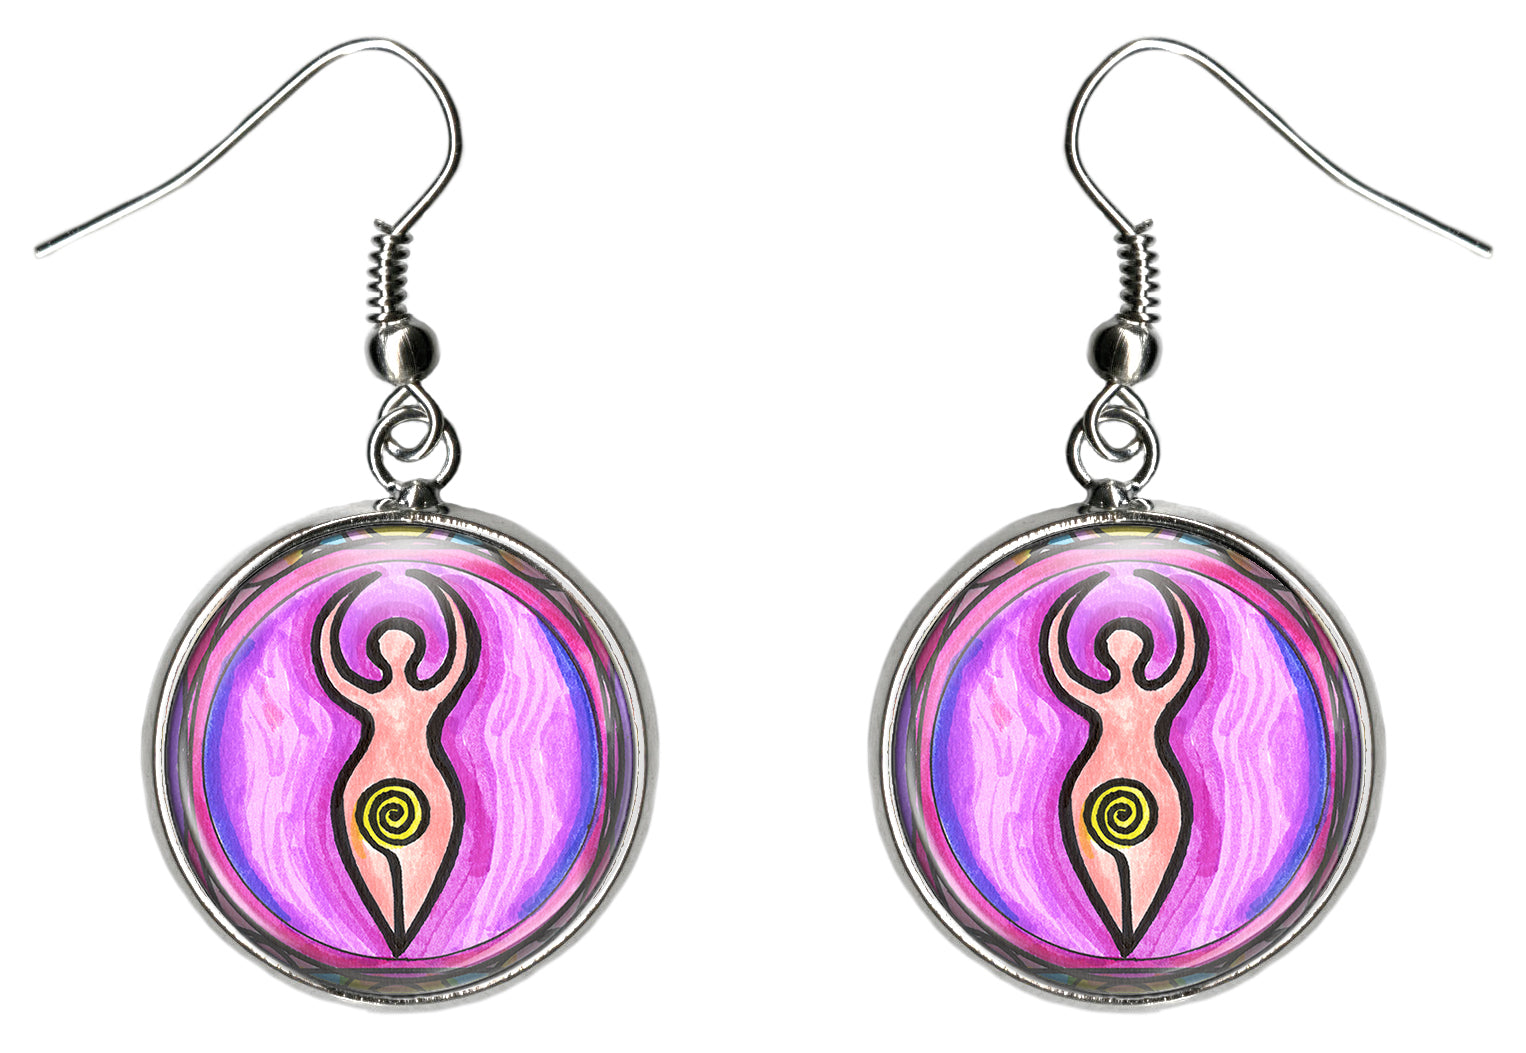 Spiral Goddess Silver Surgical Stainless Steel Hypoallergenic Earrings